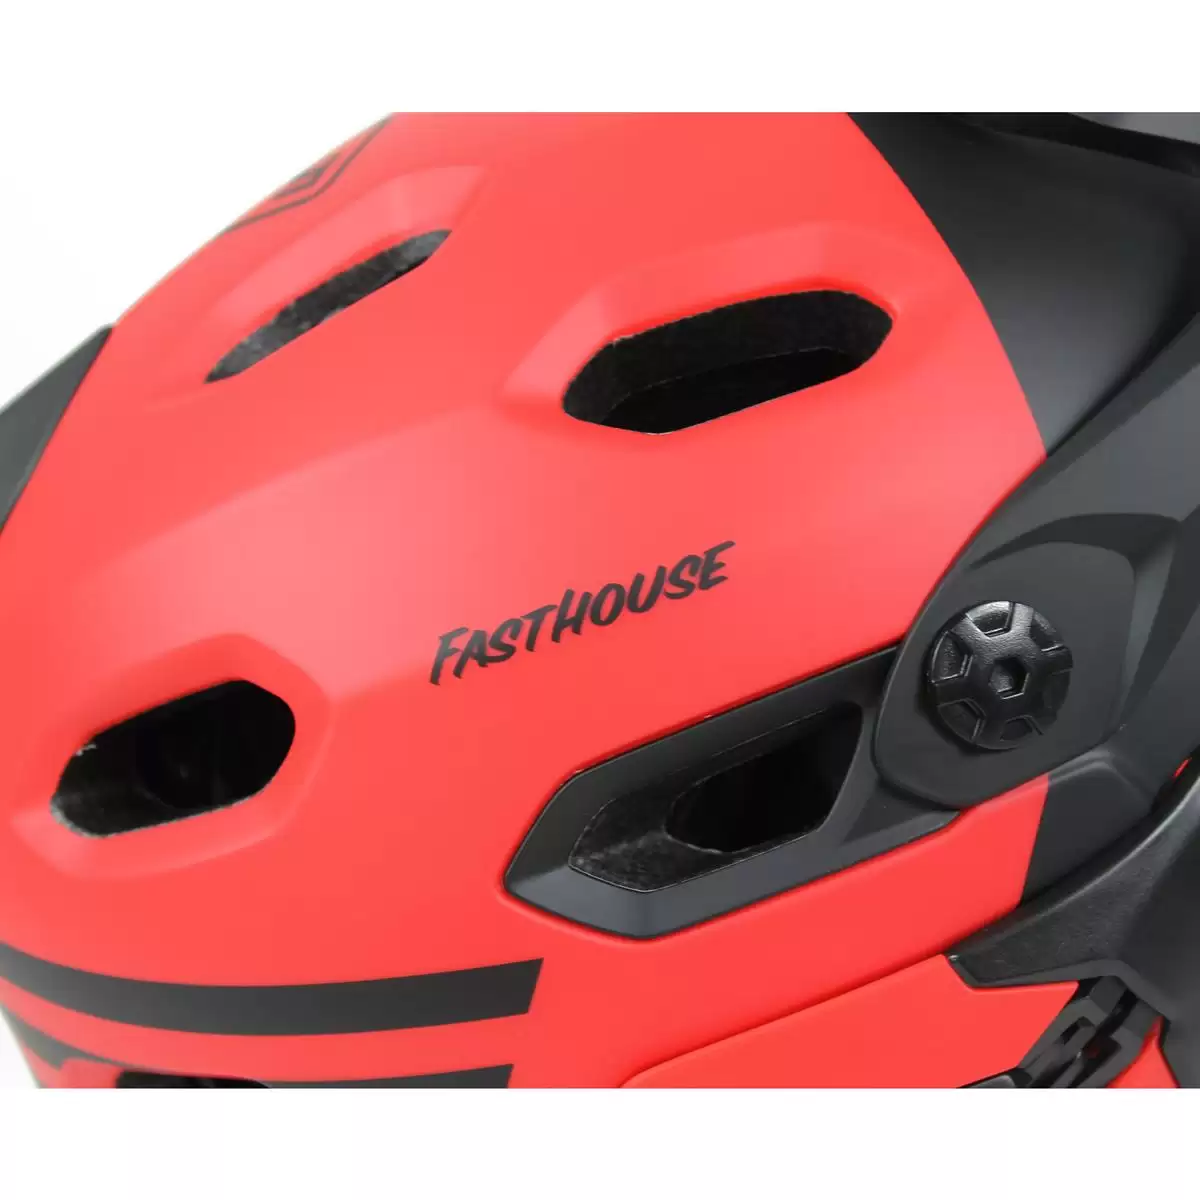 Casque Super DH MIPS Fasthouse Rouge Taille M (55-59cm) #5